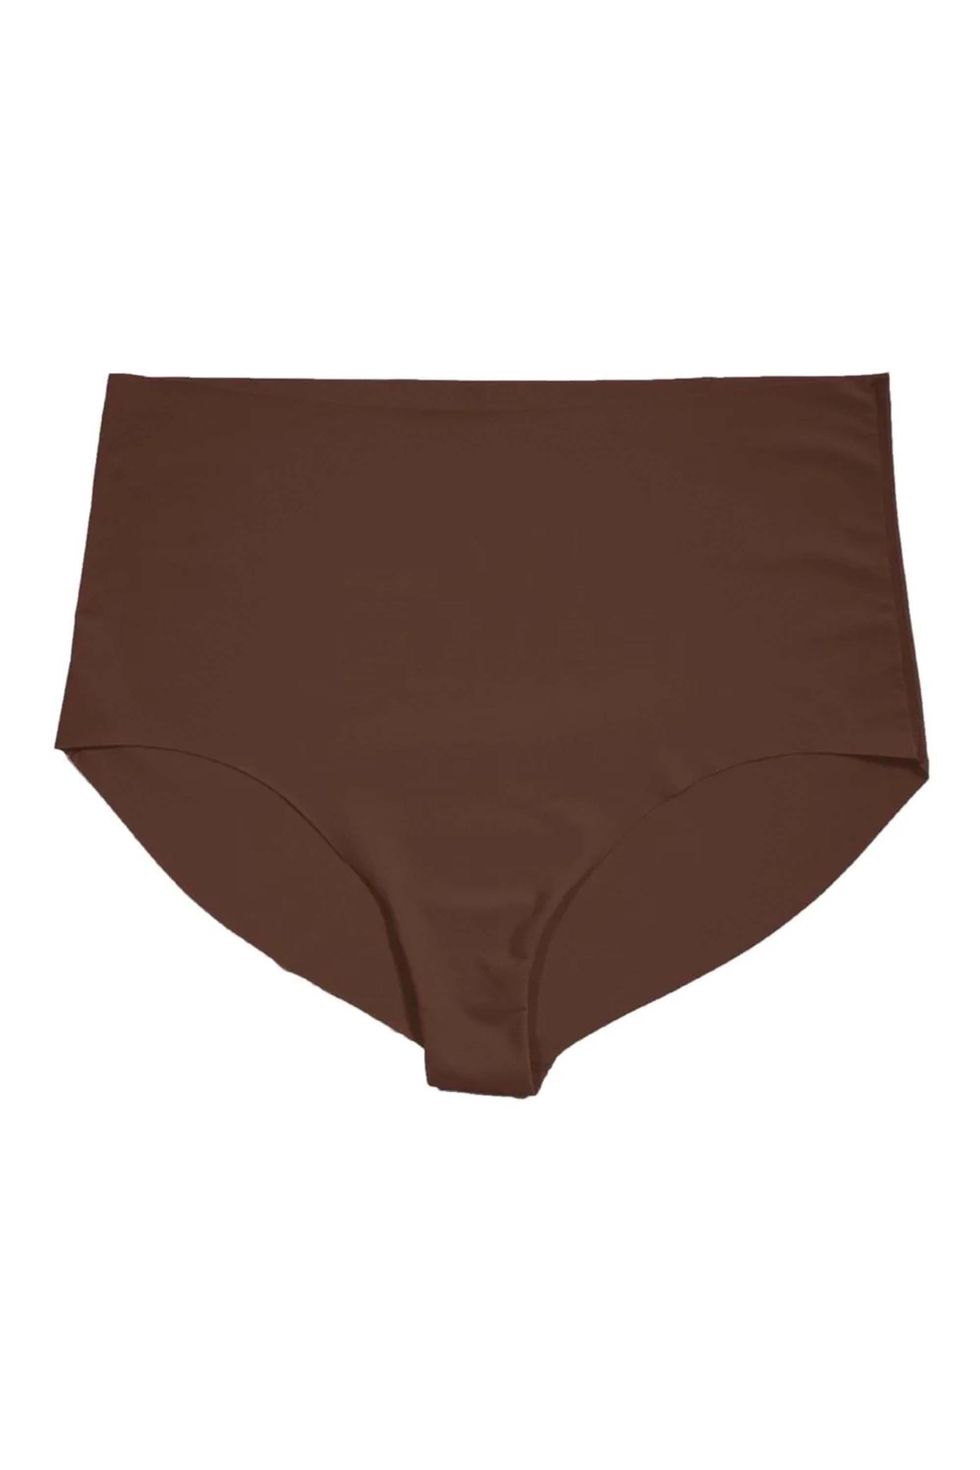 Buy GoodGoods Women Sexy Leather Briefs Thong Panties Knickers